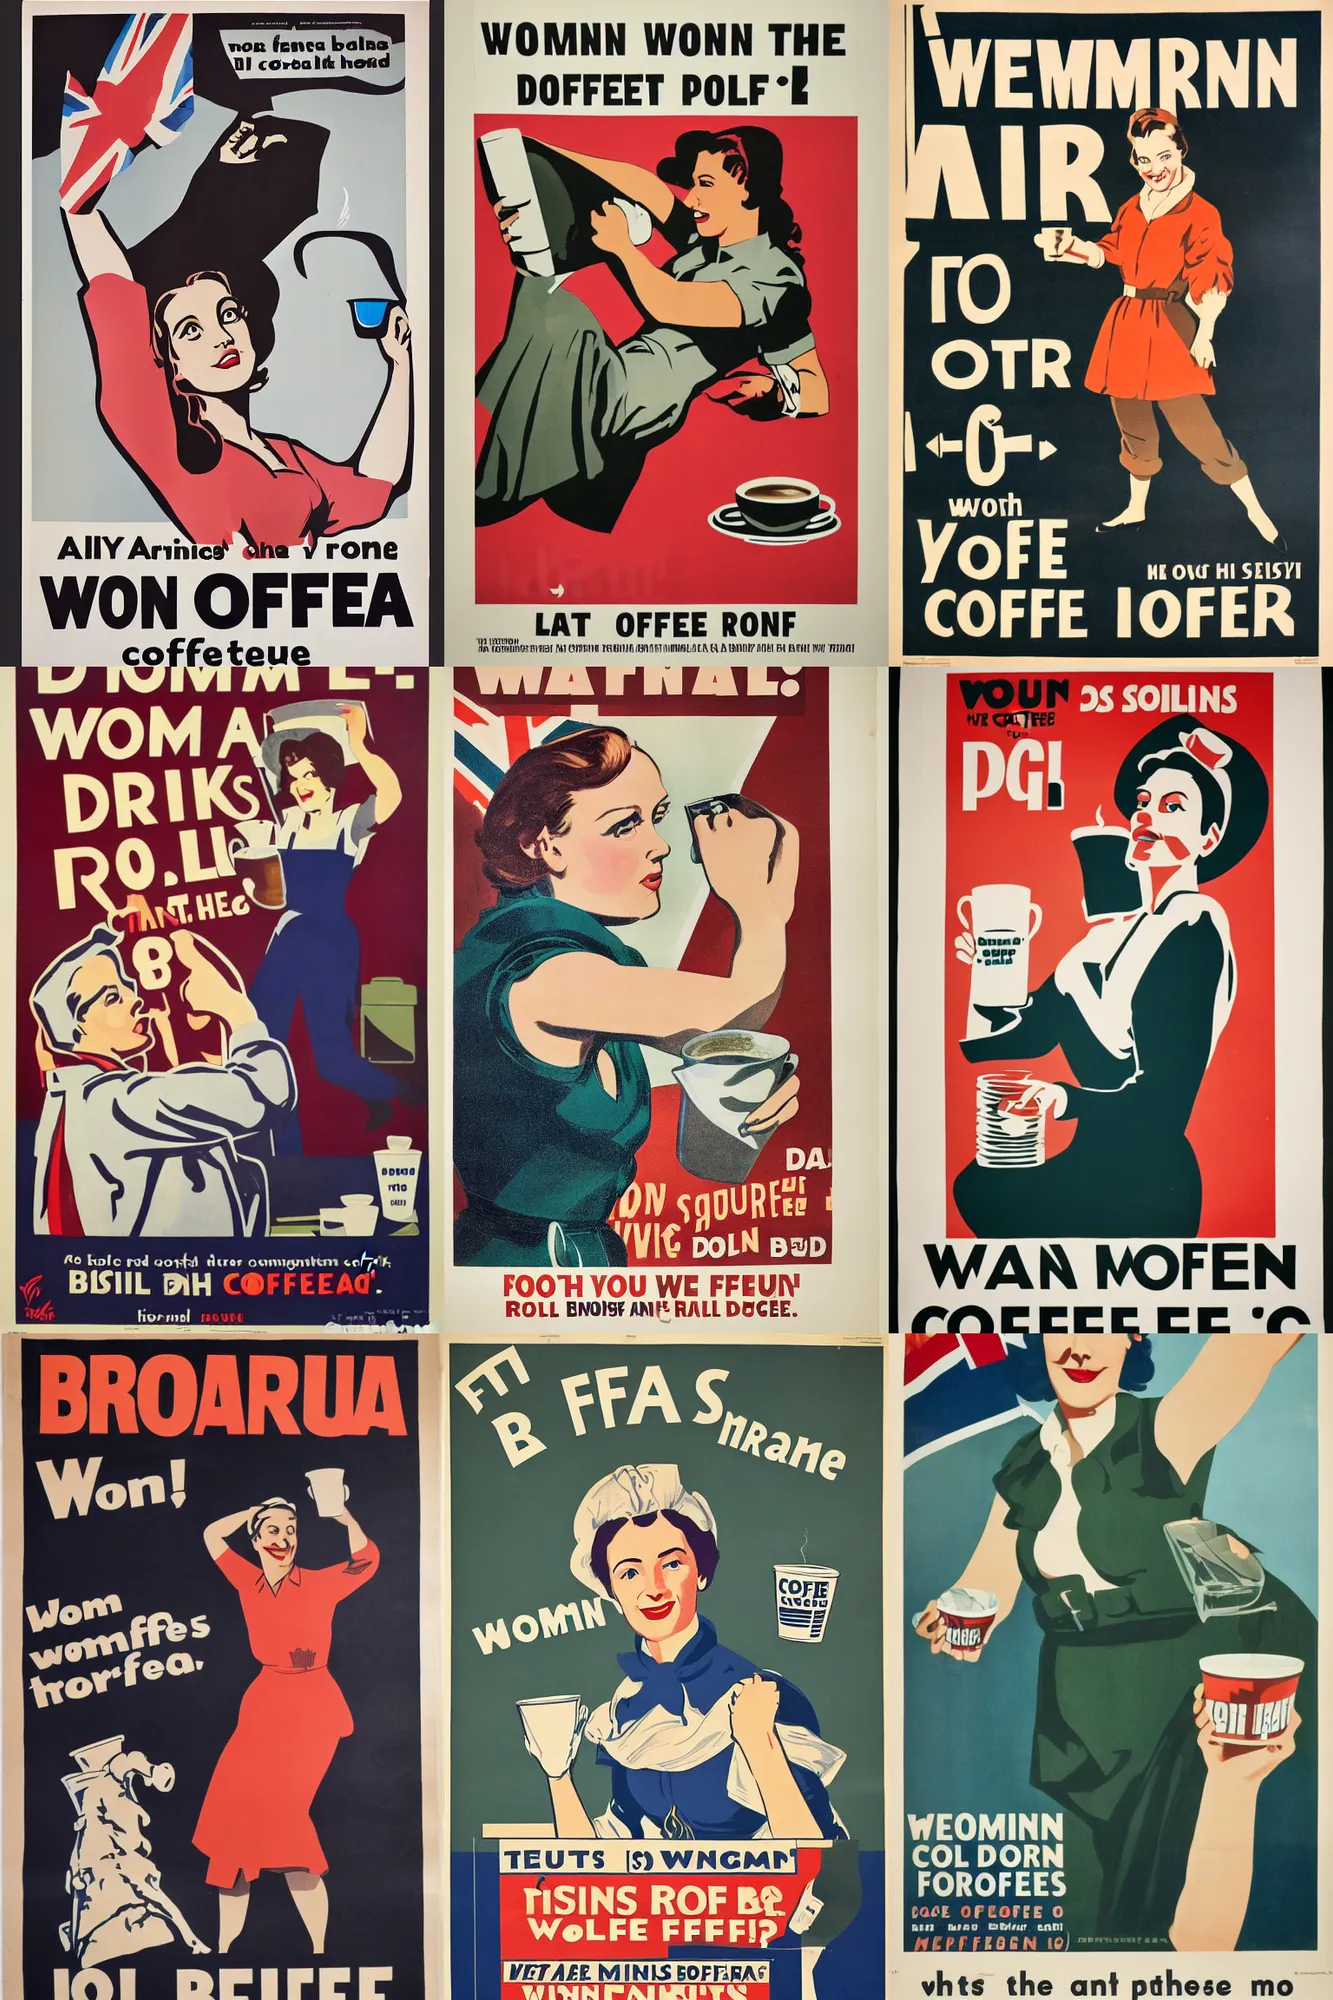 Prompt: british propaganda poster, woman, drink more coffee, roll sleeves up